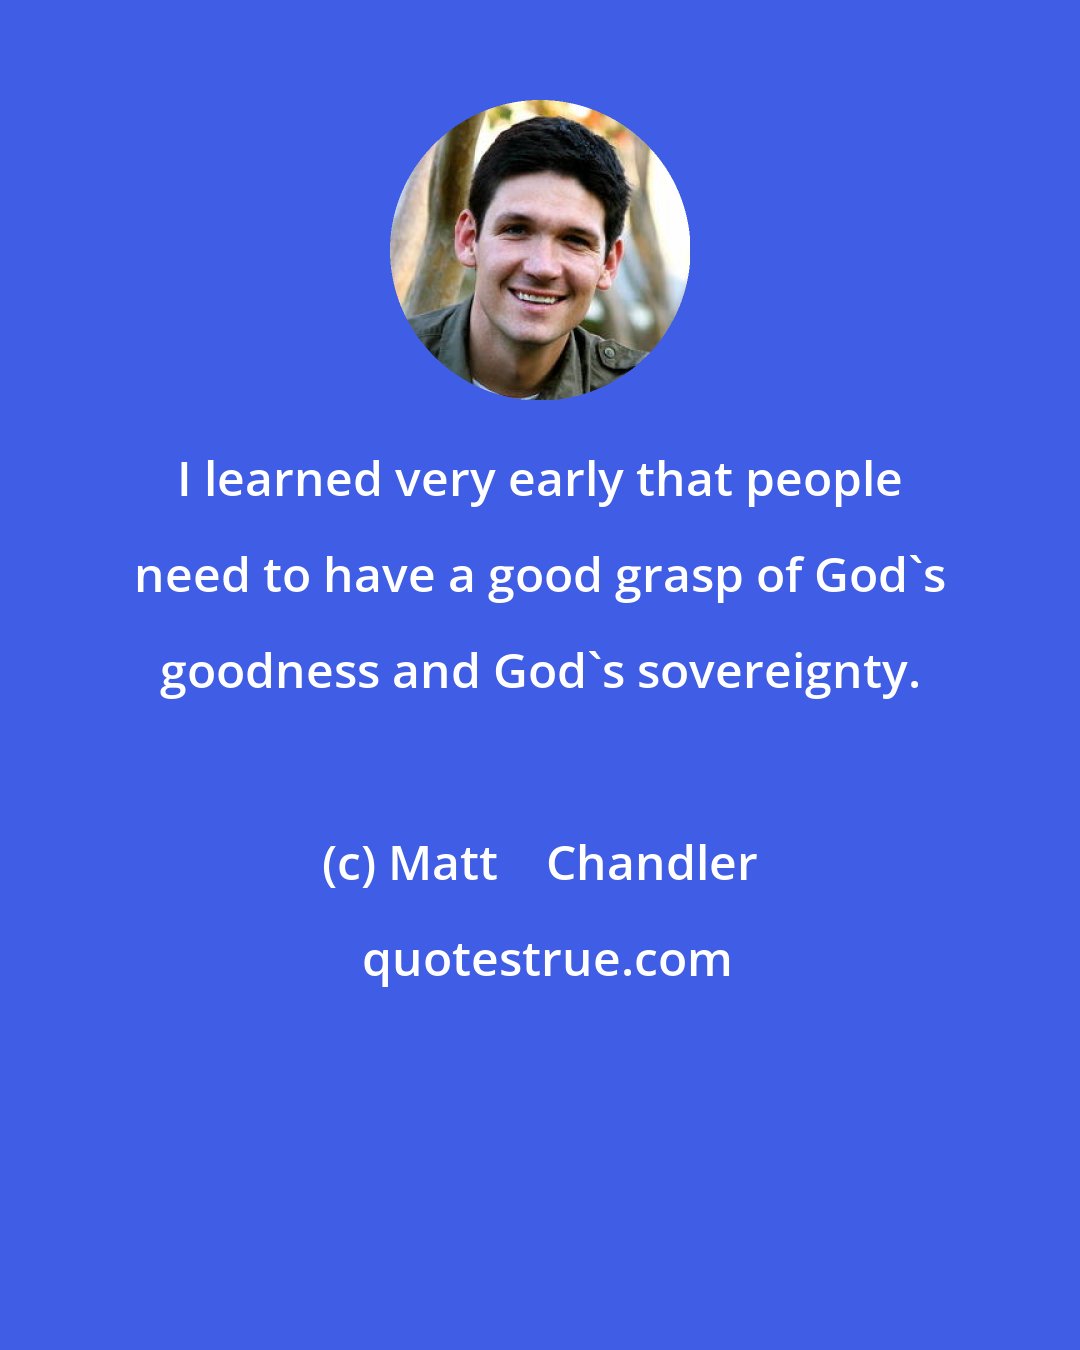 Matt    Chandler: I learned very early that people need to have a good grasp of God's goodness and God's sovereignty.